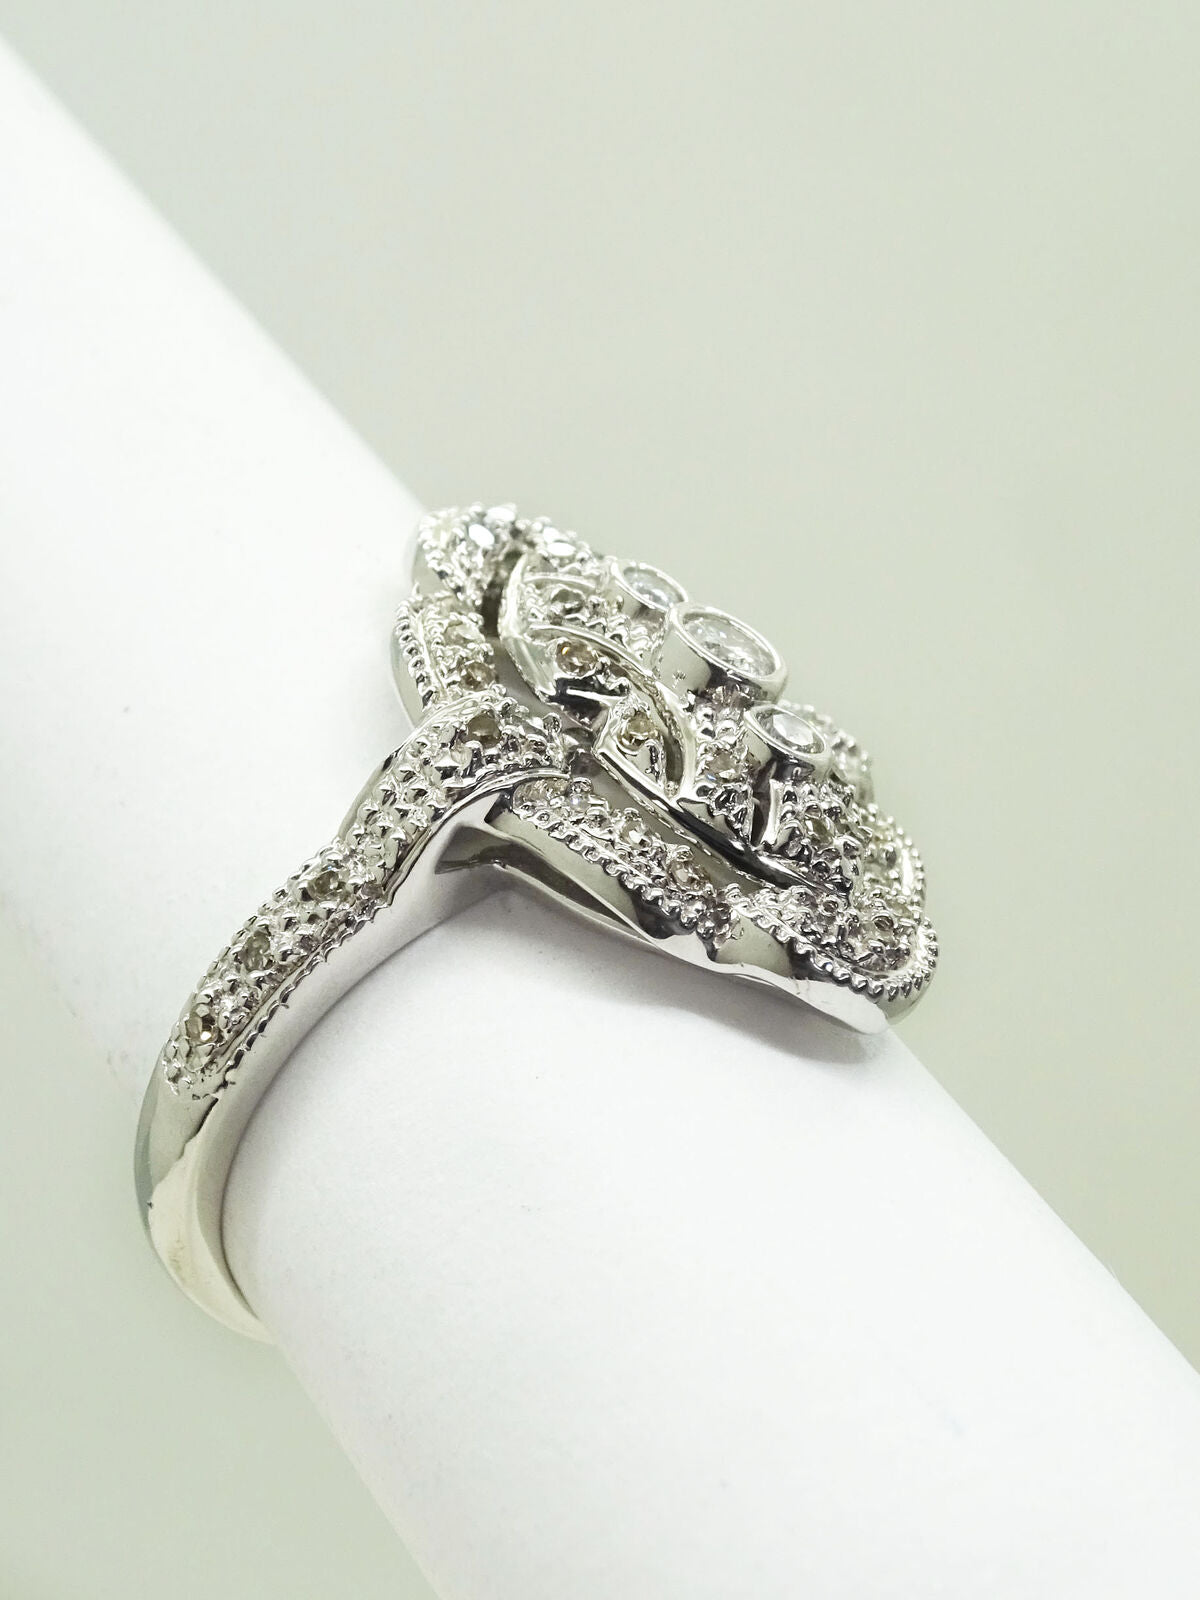 0.38ct tw Earth Mined Diamond Ring 14k White Gold Size 7.25